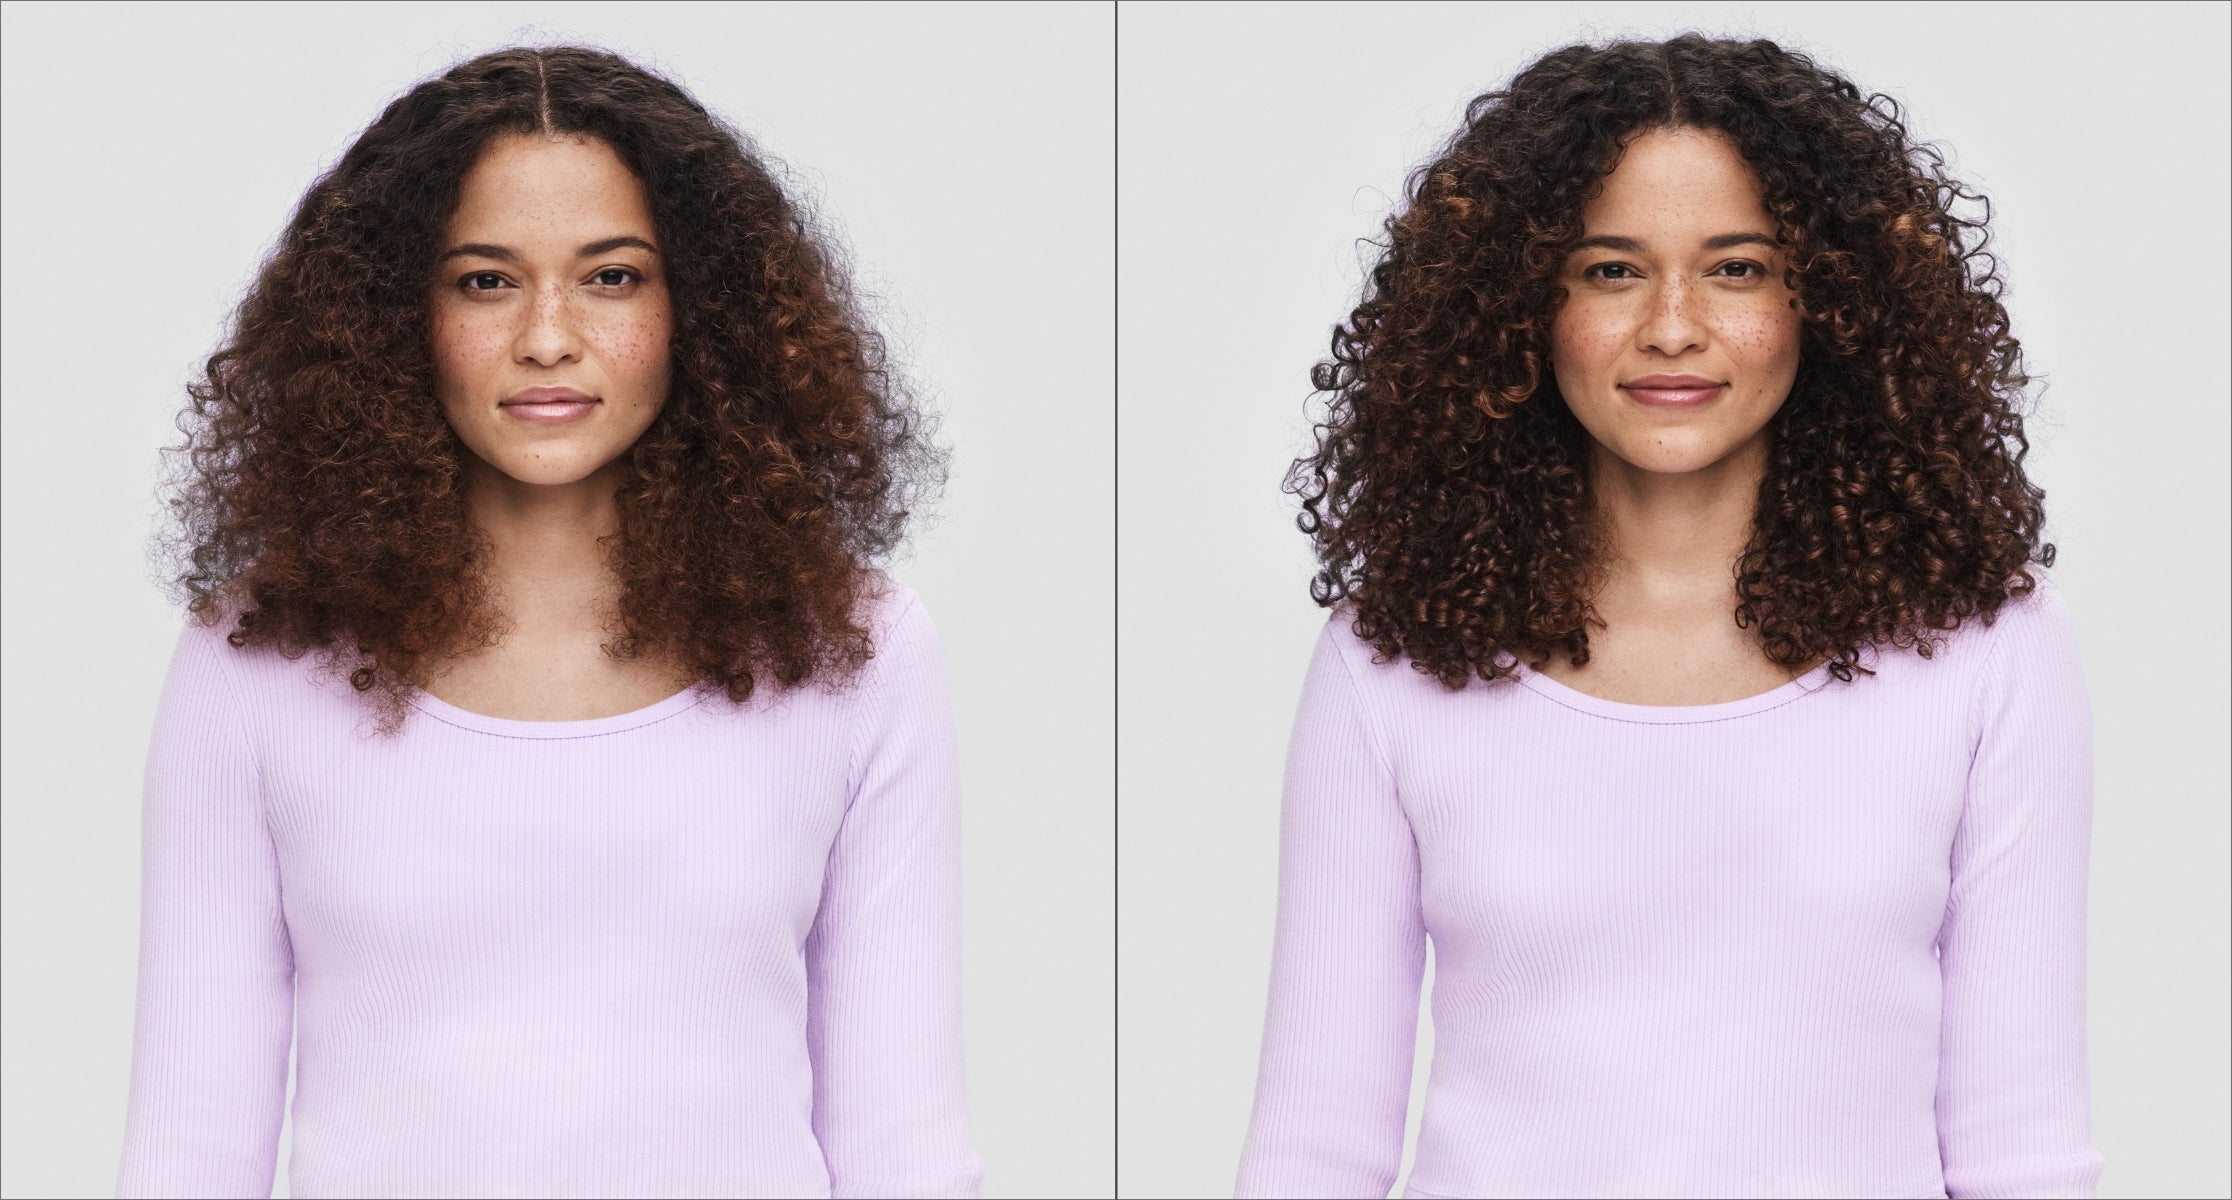 Before and after image of woman with brown, long curly hair wearing a purple long-sleeved shirt with frizzy hair on the left and defined curls on the right. 